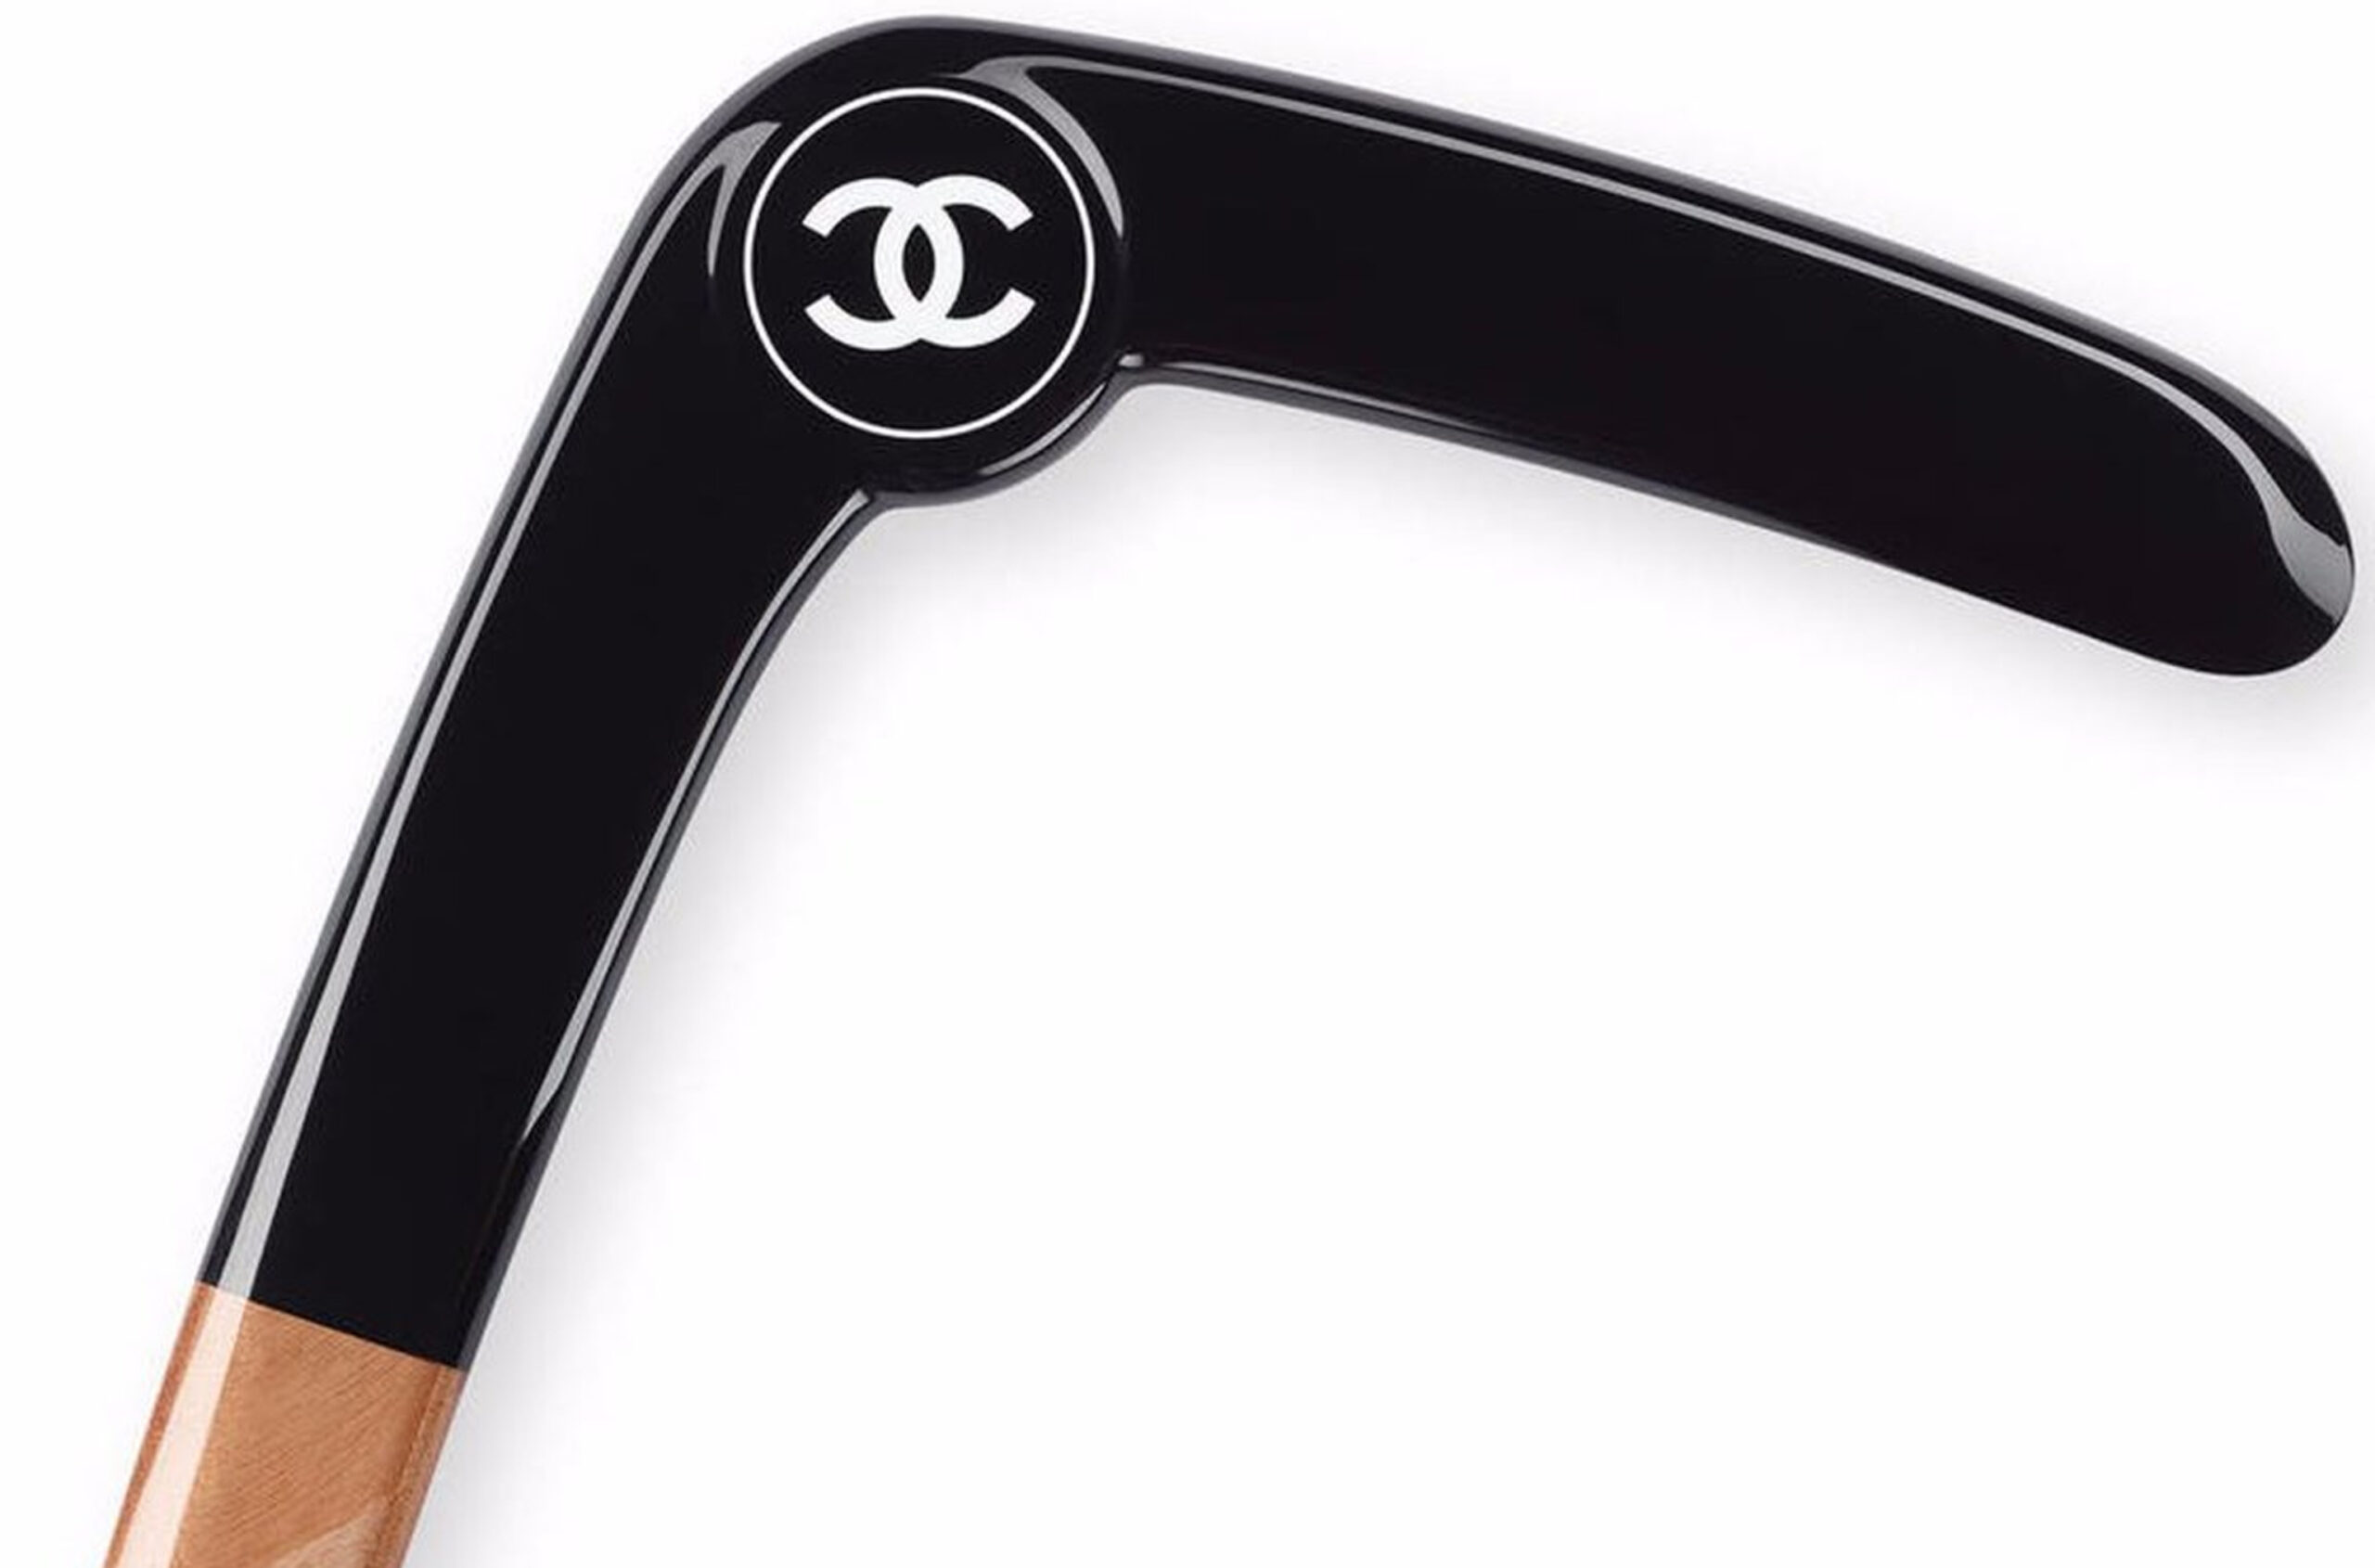 Chanel boomerang has caused a furore on social media for cultural appropriation.